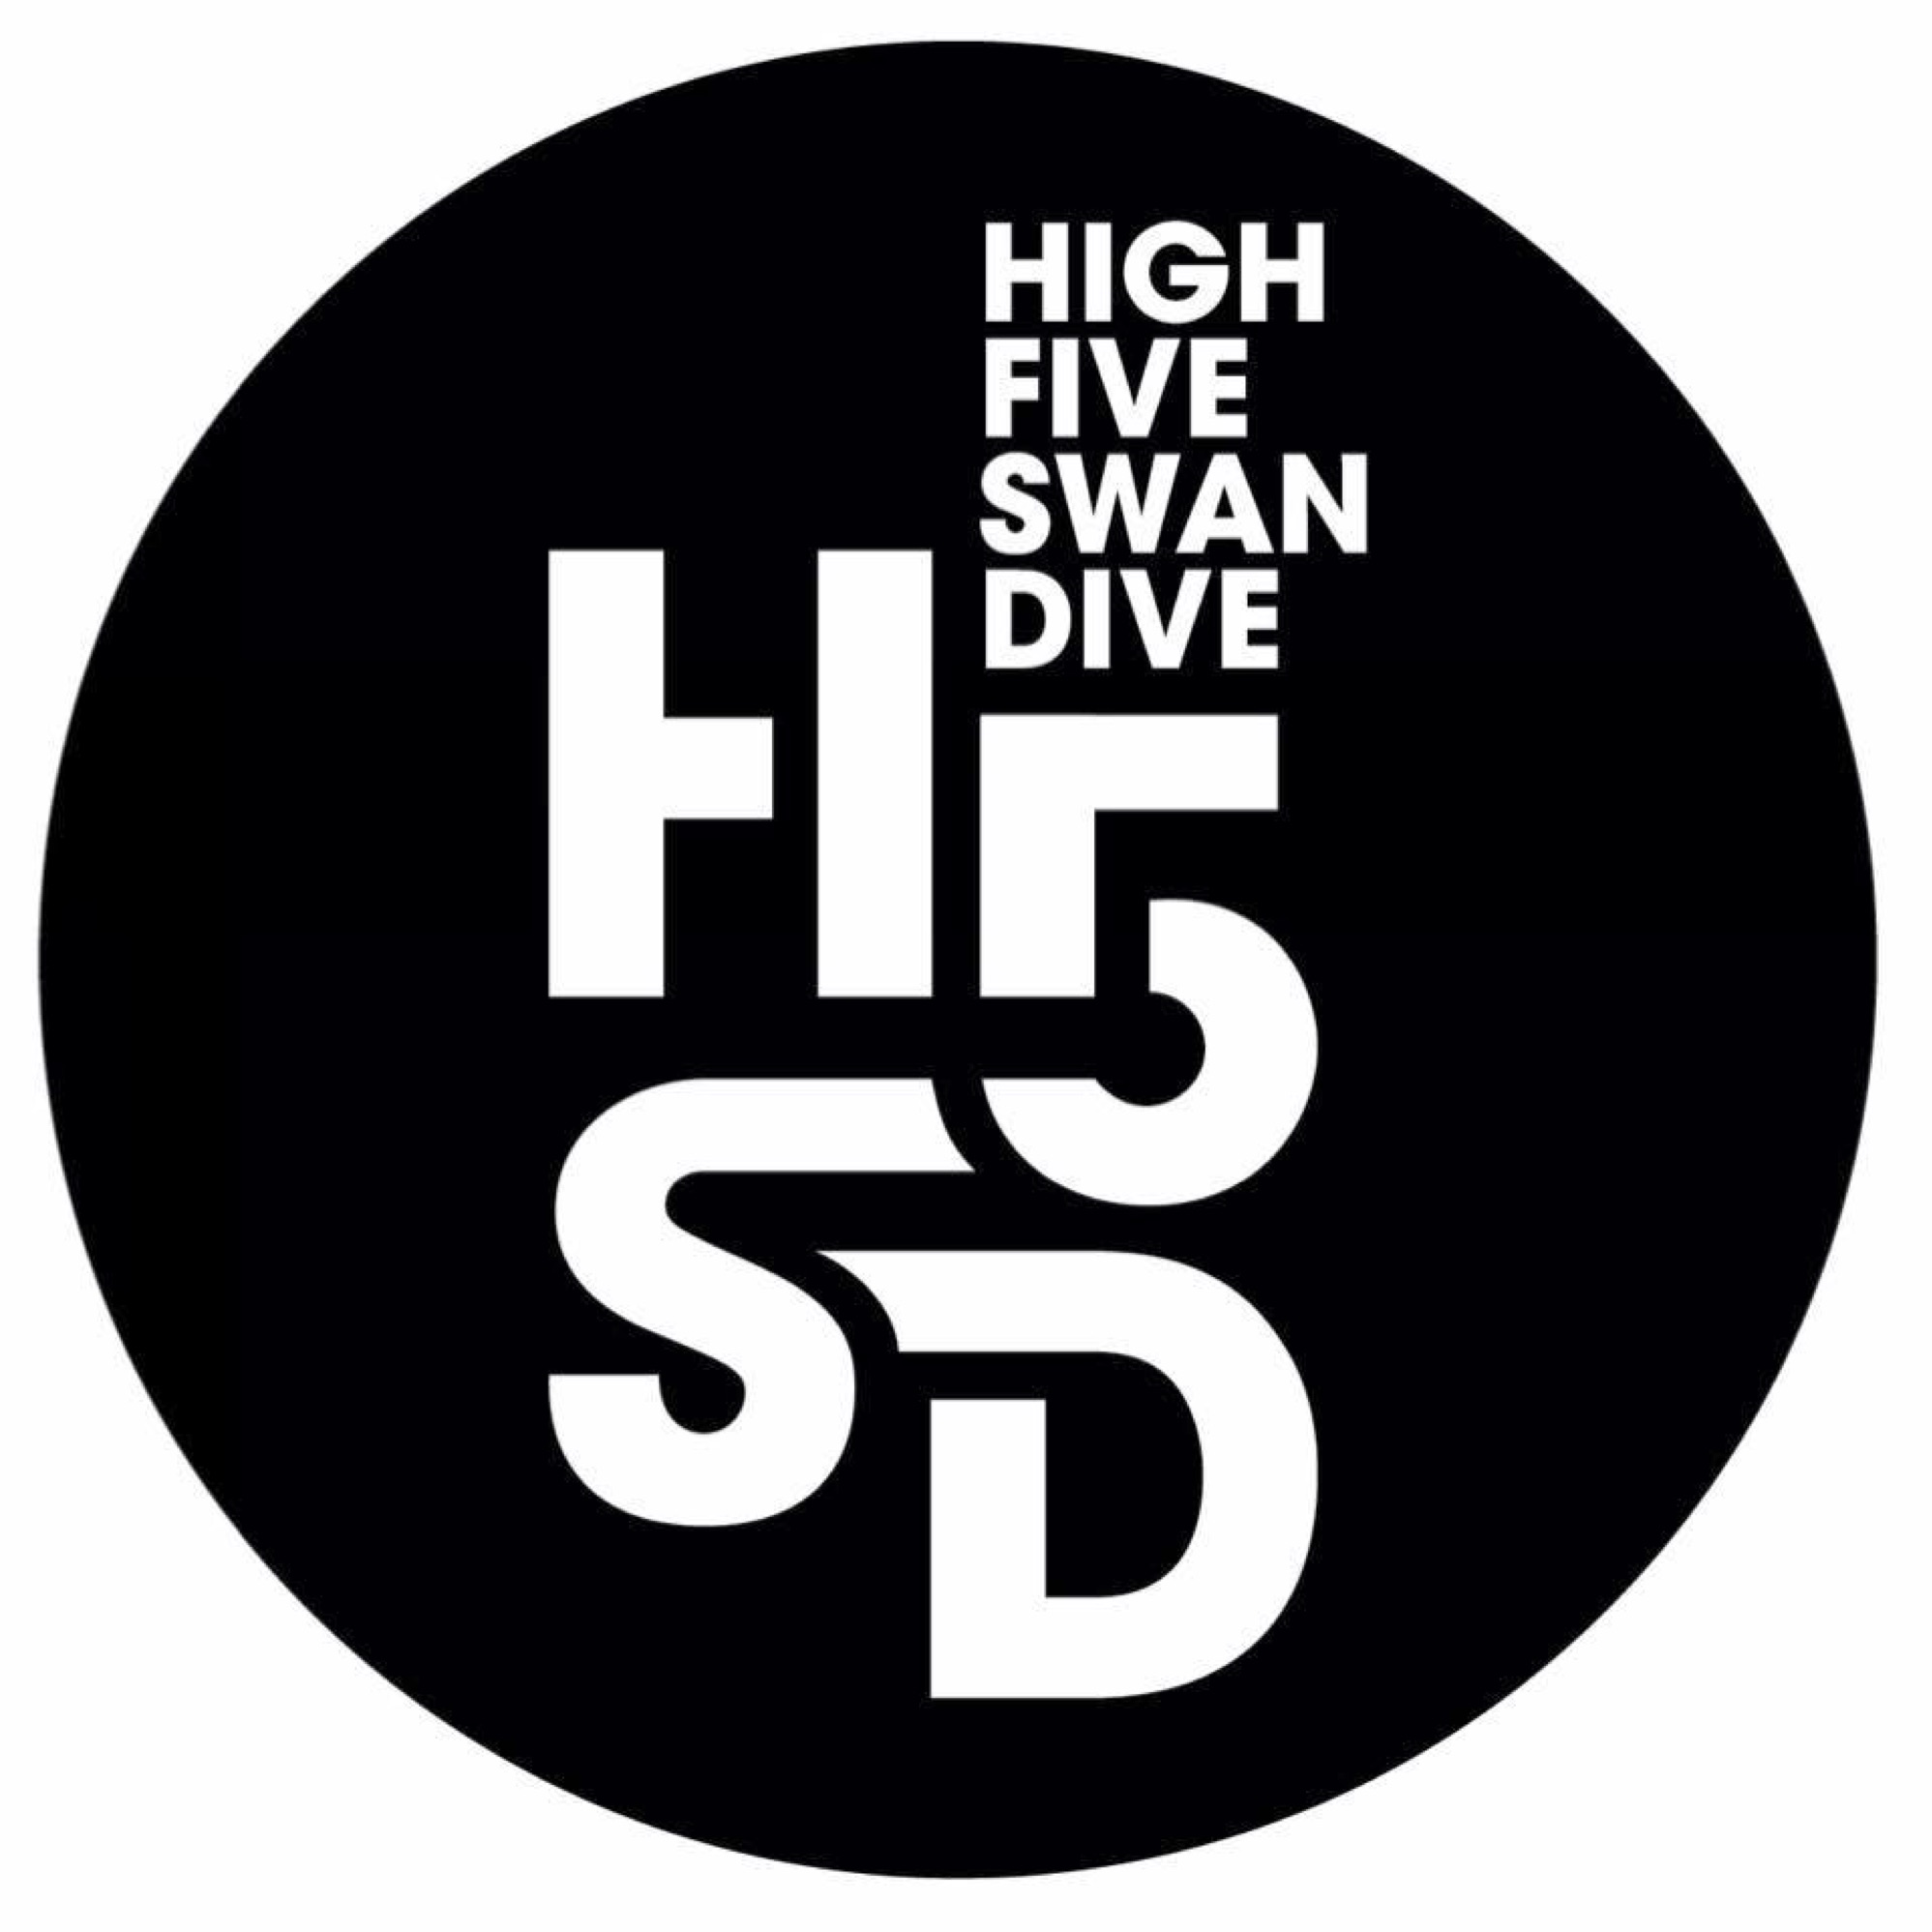 Be high five